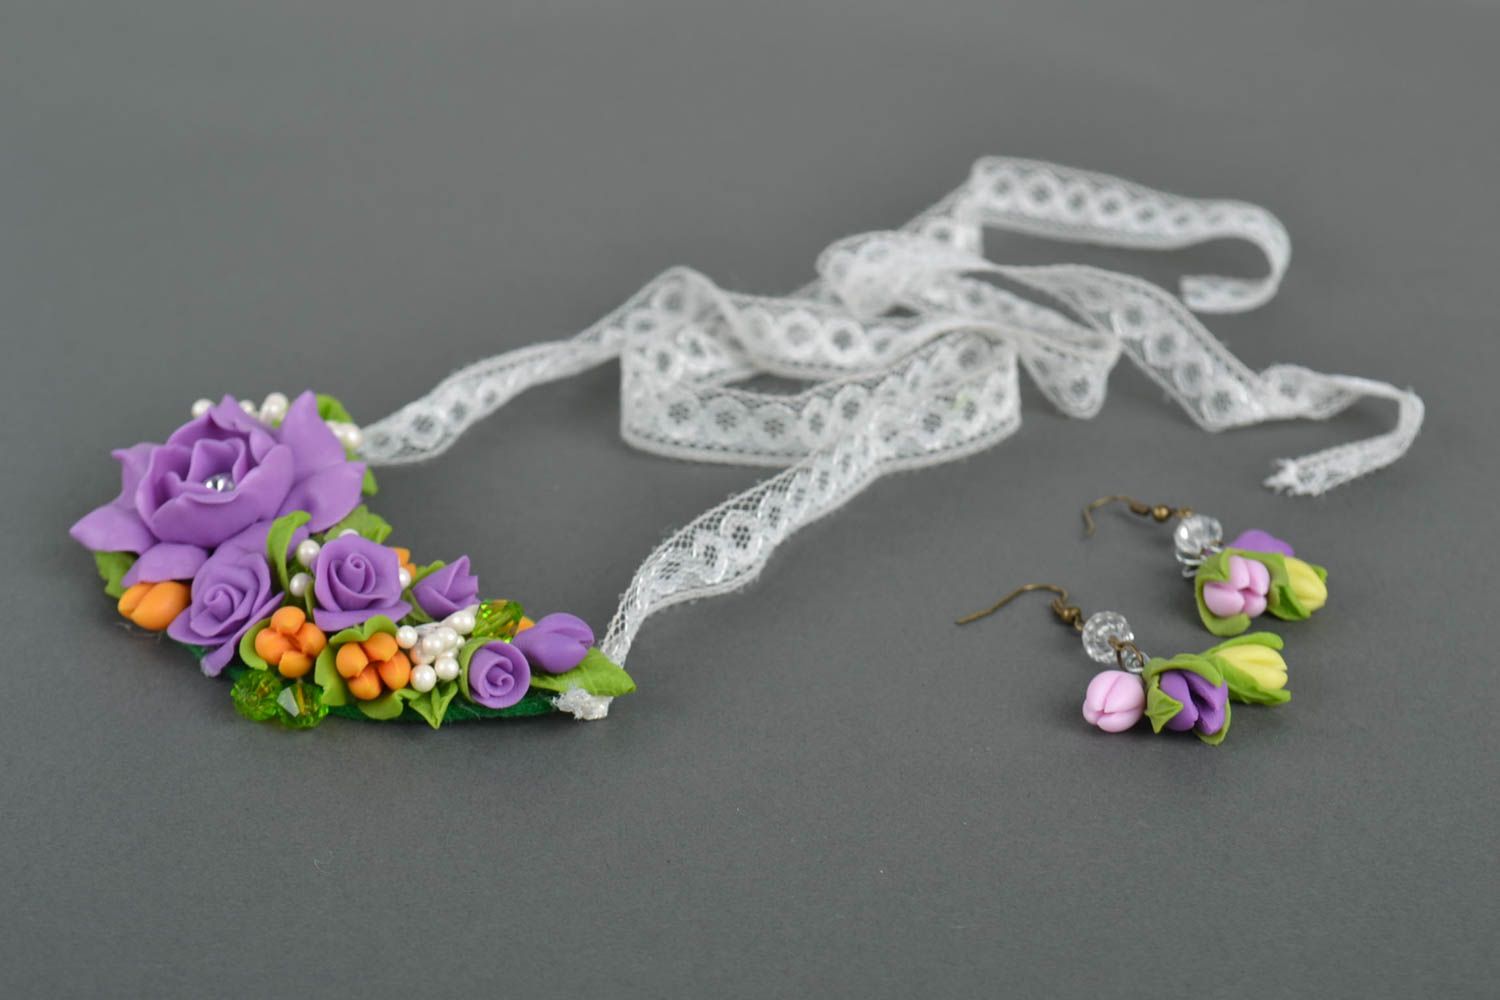 Flower jewelry set handmade necklace dangling earrings polymer clay gift for her photo 3